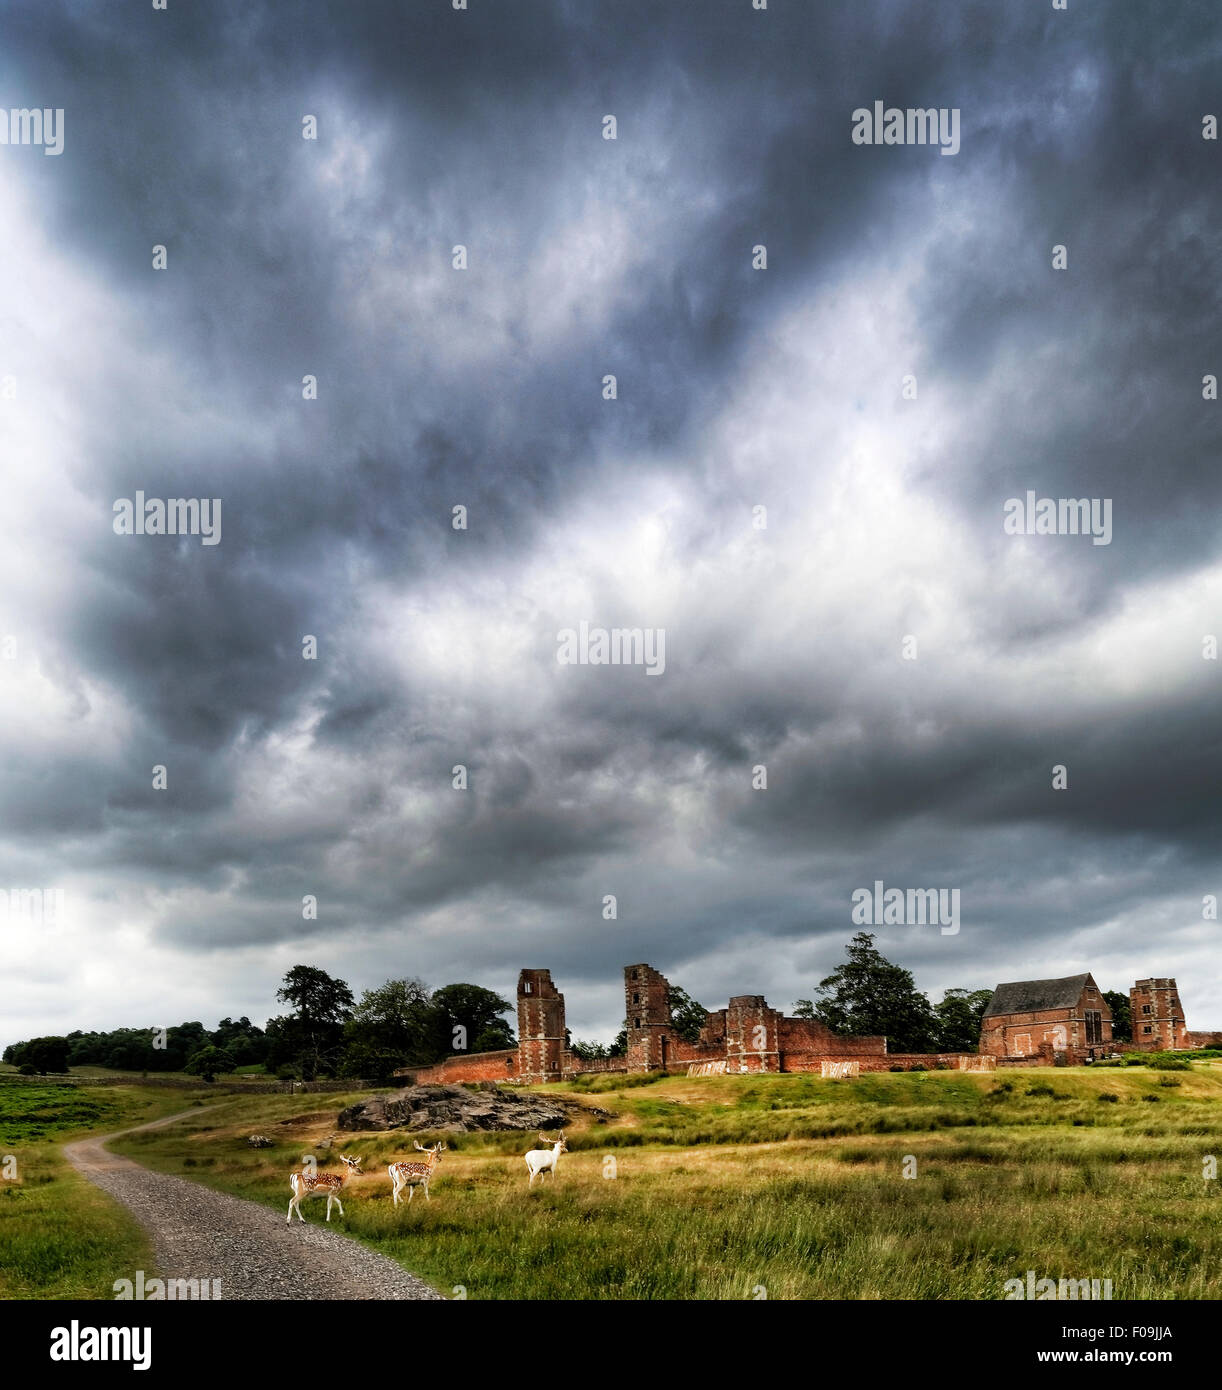 Bradgate Park is a public park in Charnwood Forest, in Leicestershire, England, northwest of Leicester. Stock Photo